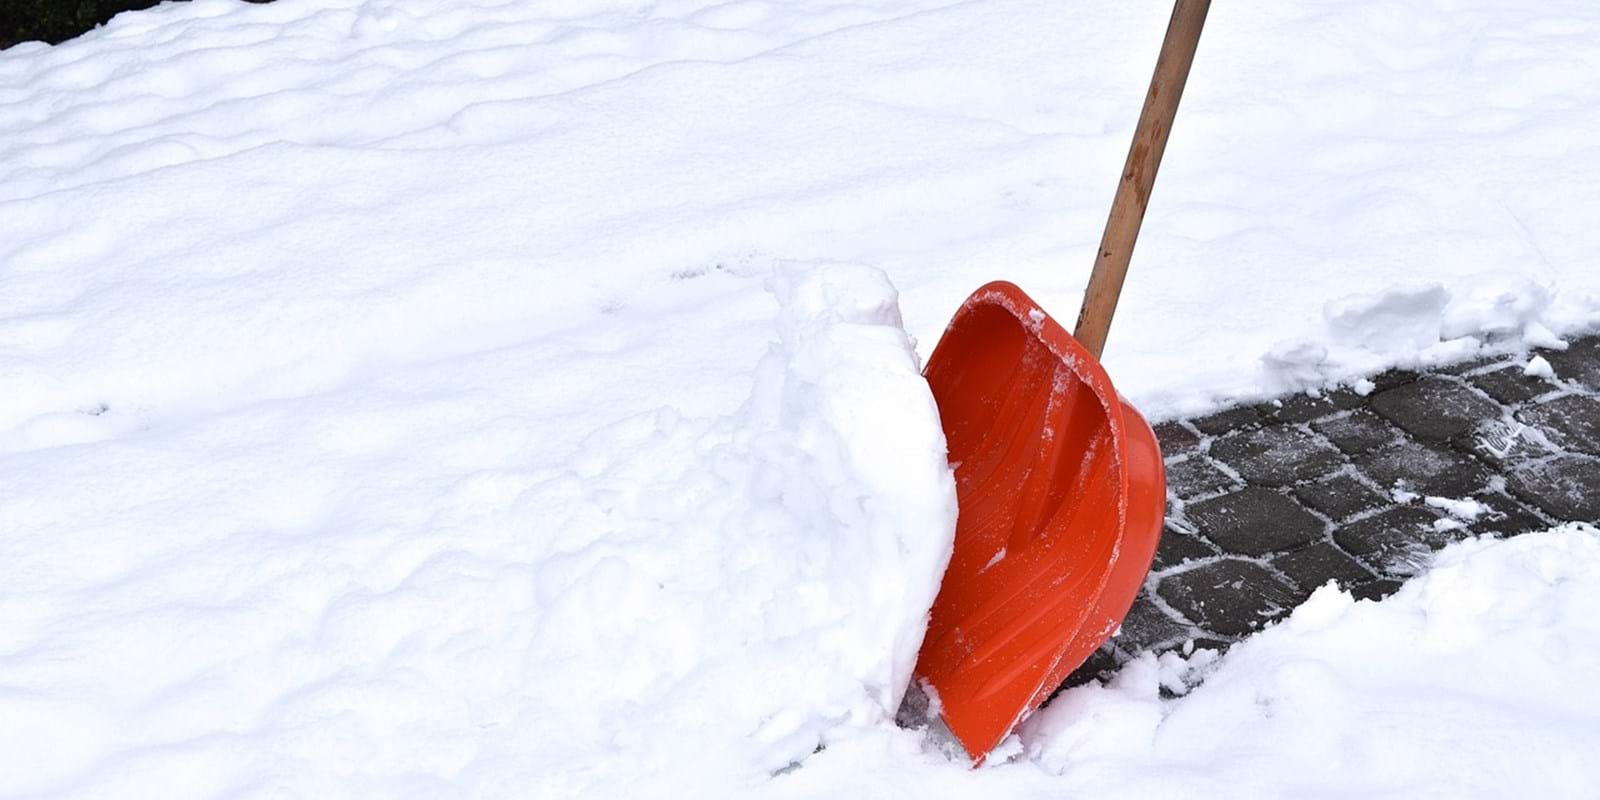 Snow removal: An important clause in the lease